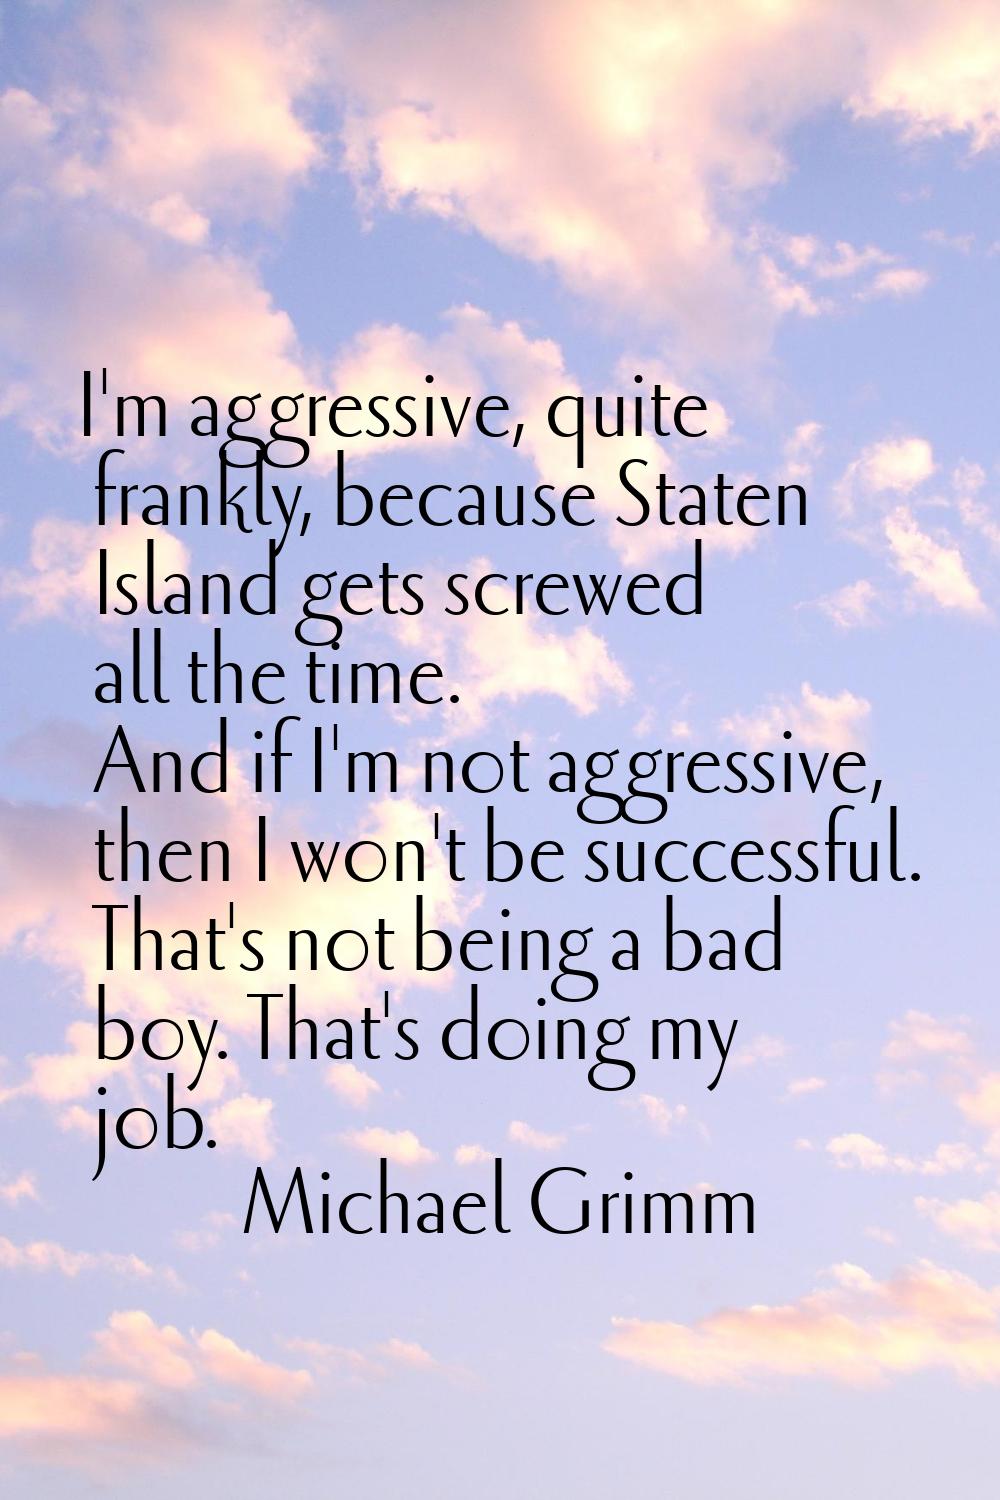 I'm aggressive, quite frankly, because Staten Island gets screwed all the time. And if I'm not aggr